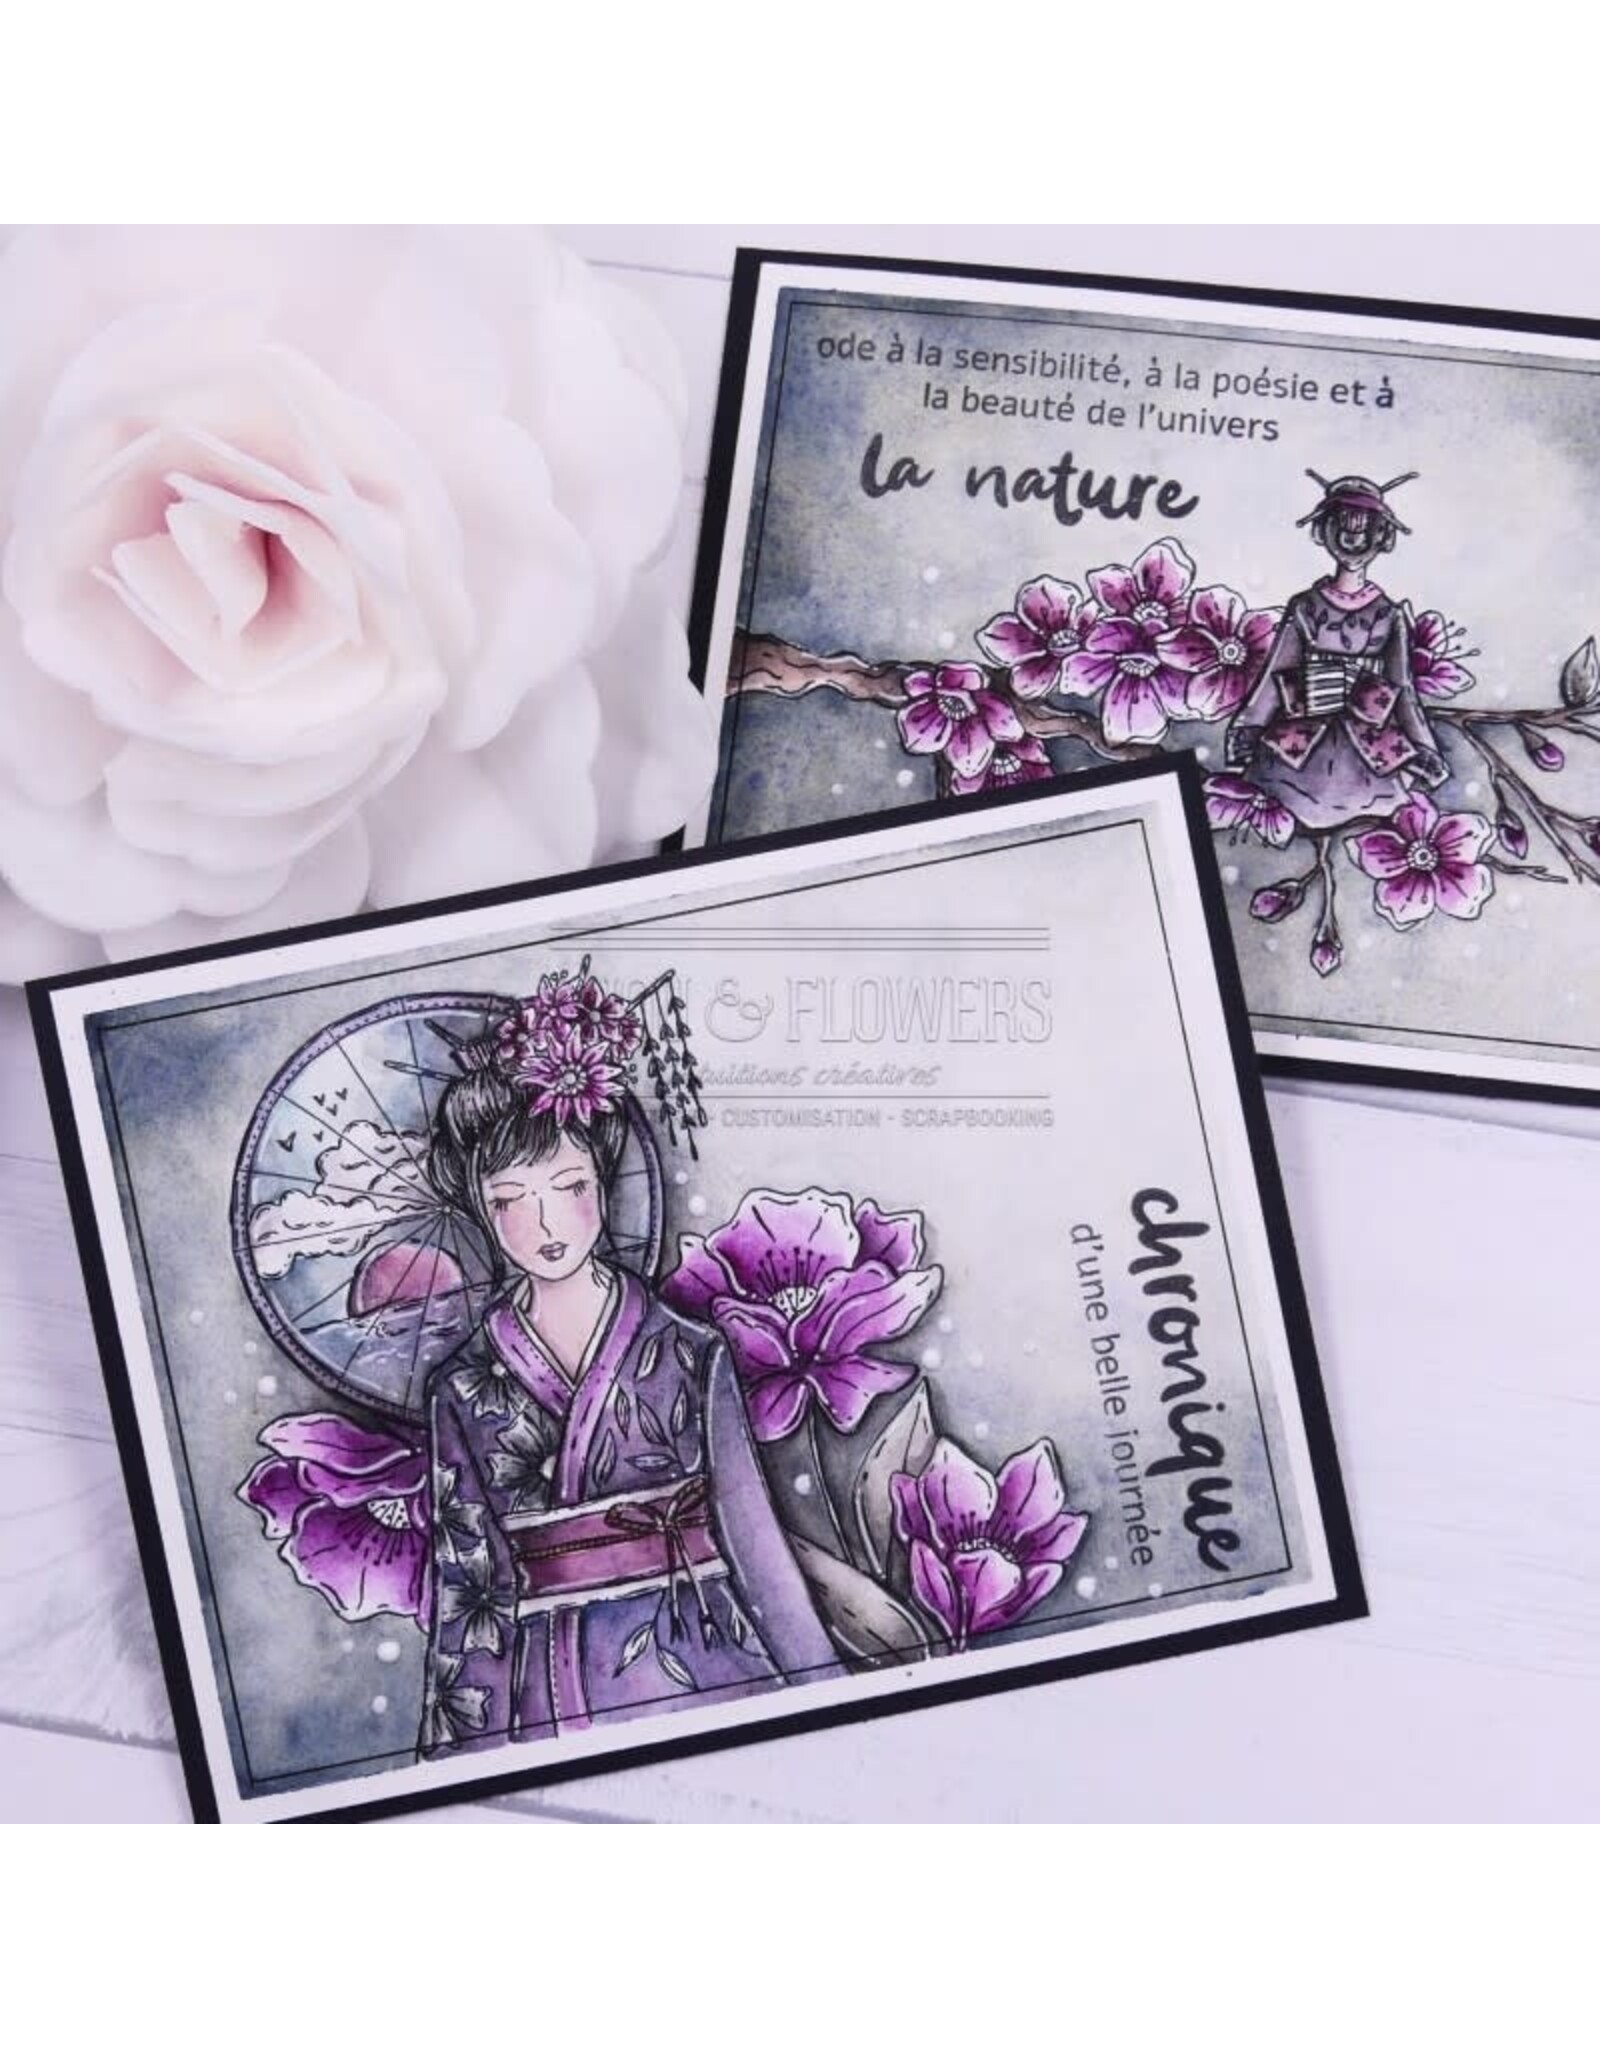 CHOU & FLOWERS CHOU & FLOWERS COLLECTION SOLEIL LEVANT FILLE OMBRELLE CLEAR STAMP